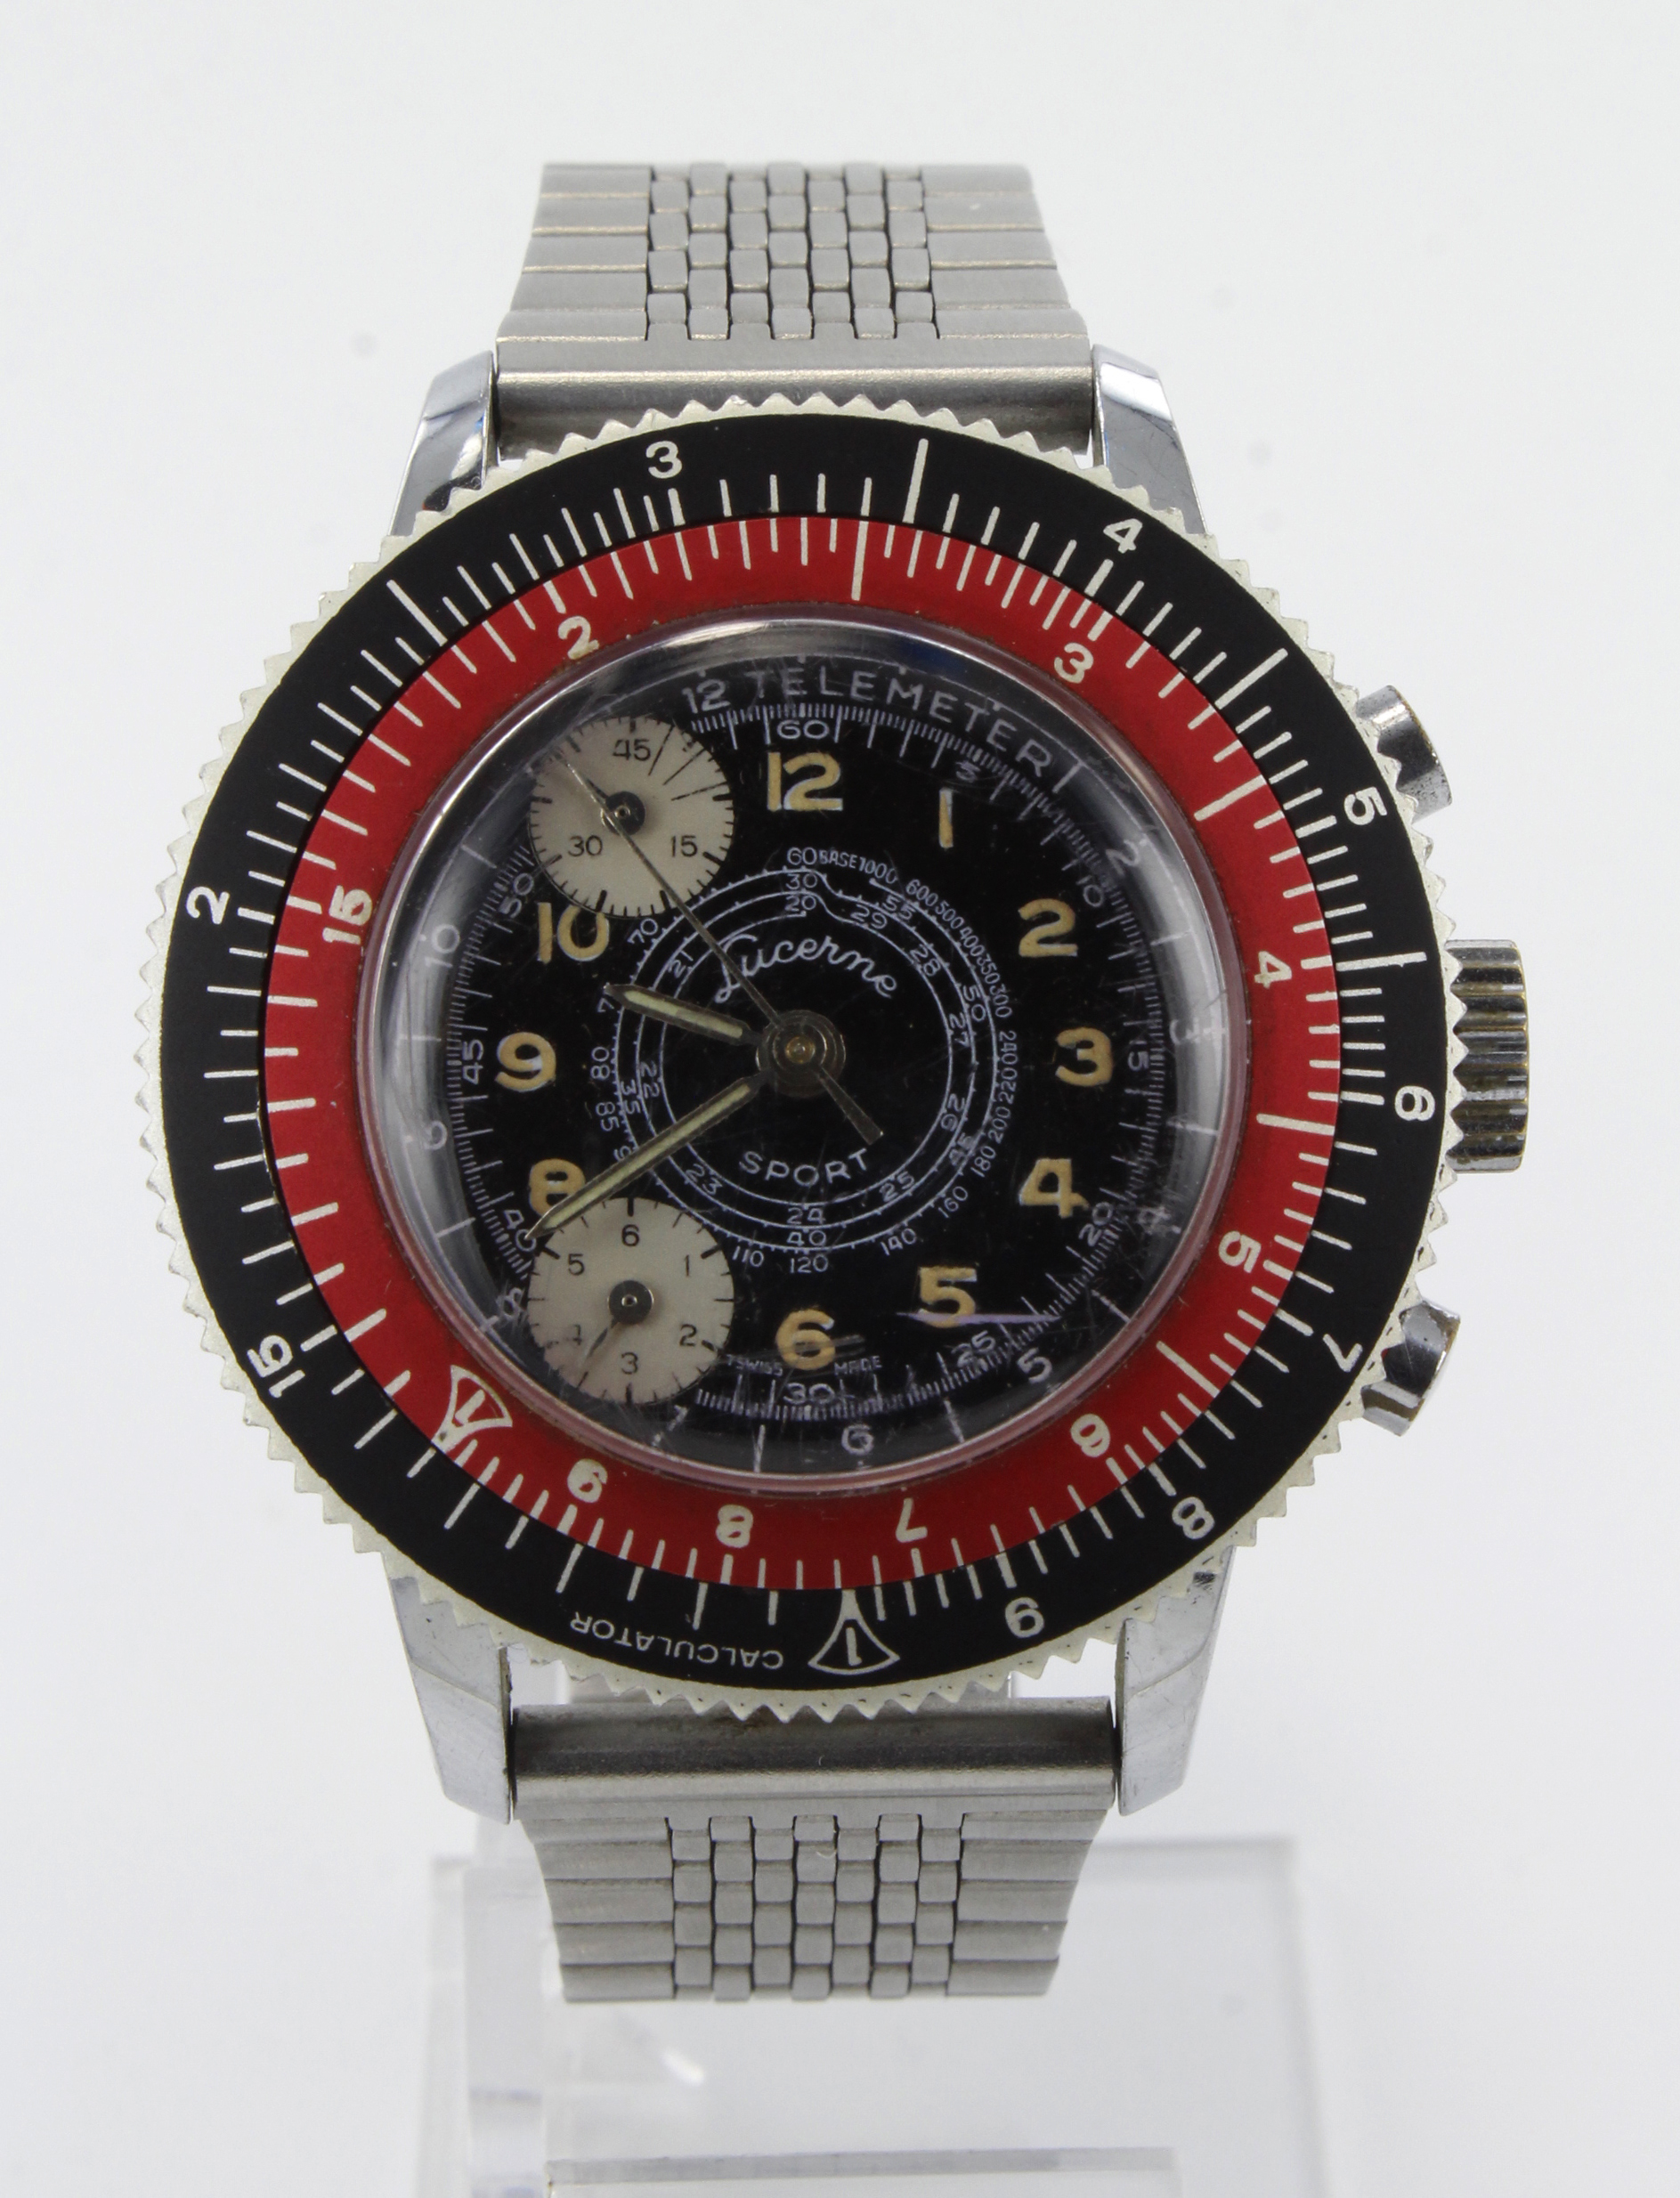 Gents stainless steel cased Lucerne Sport chronograph manual wind wristwatch, circa 1960s. The black